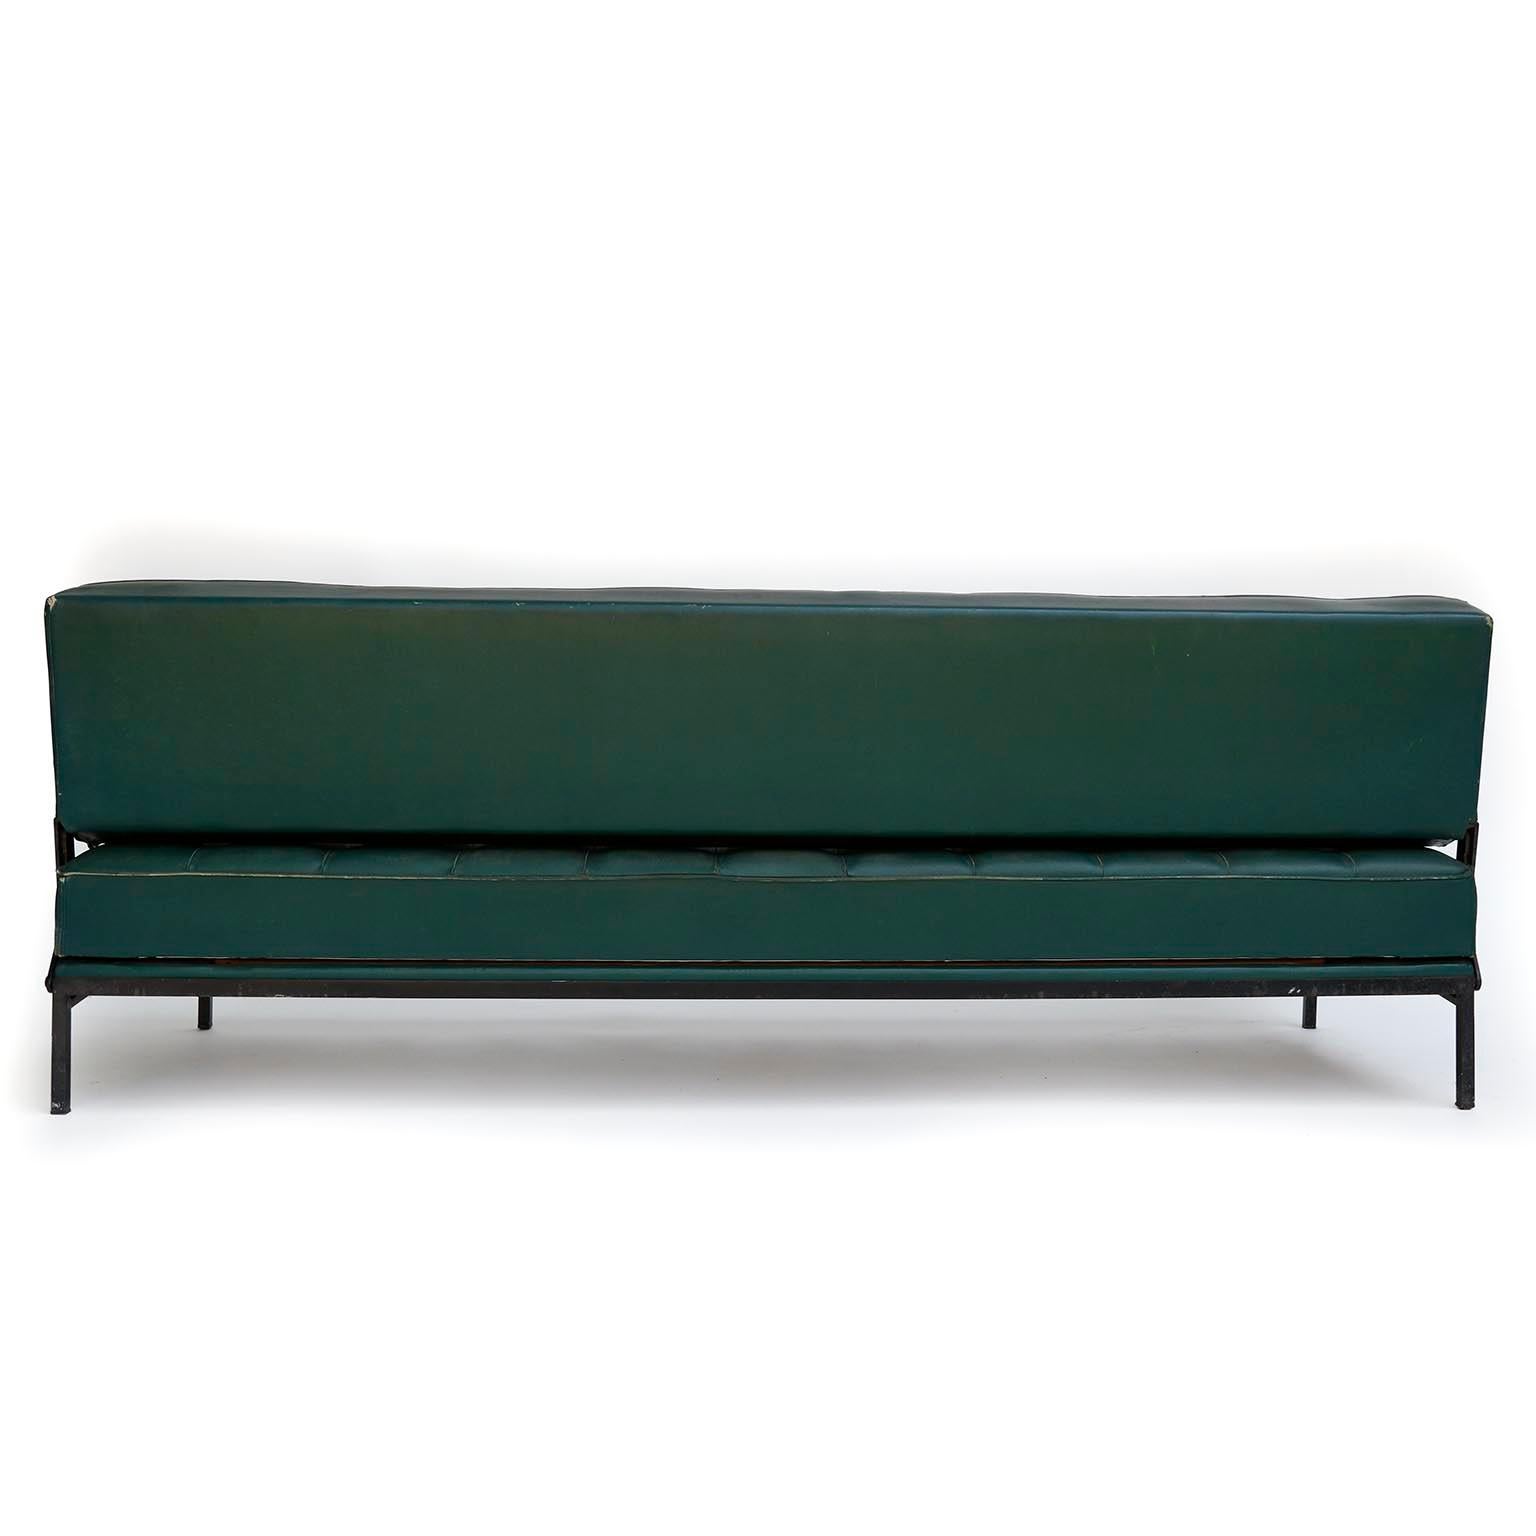 Johannes Spalt 'Constanze' Sofa Daybed Armrests, Patinated Green Leather, 1960s 2